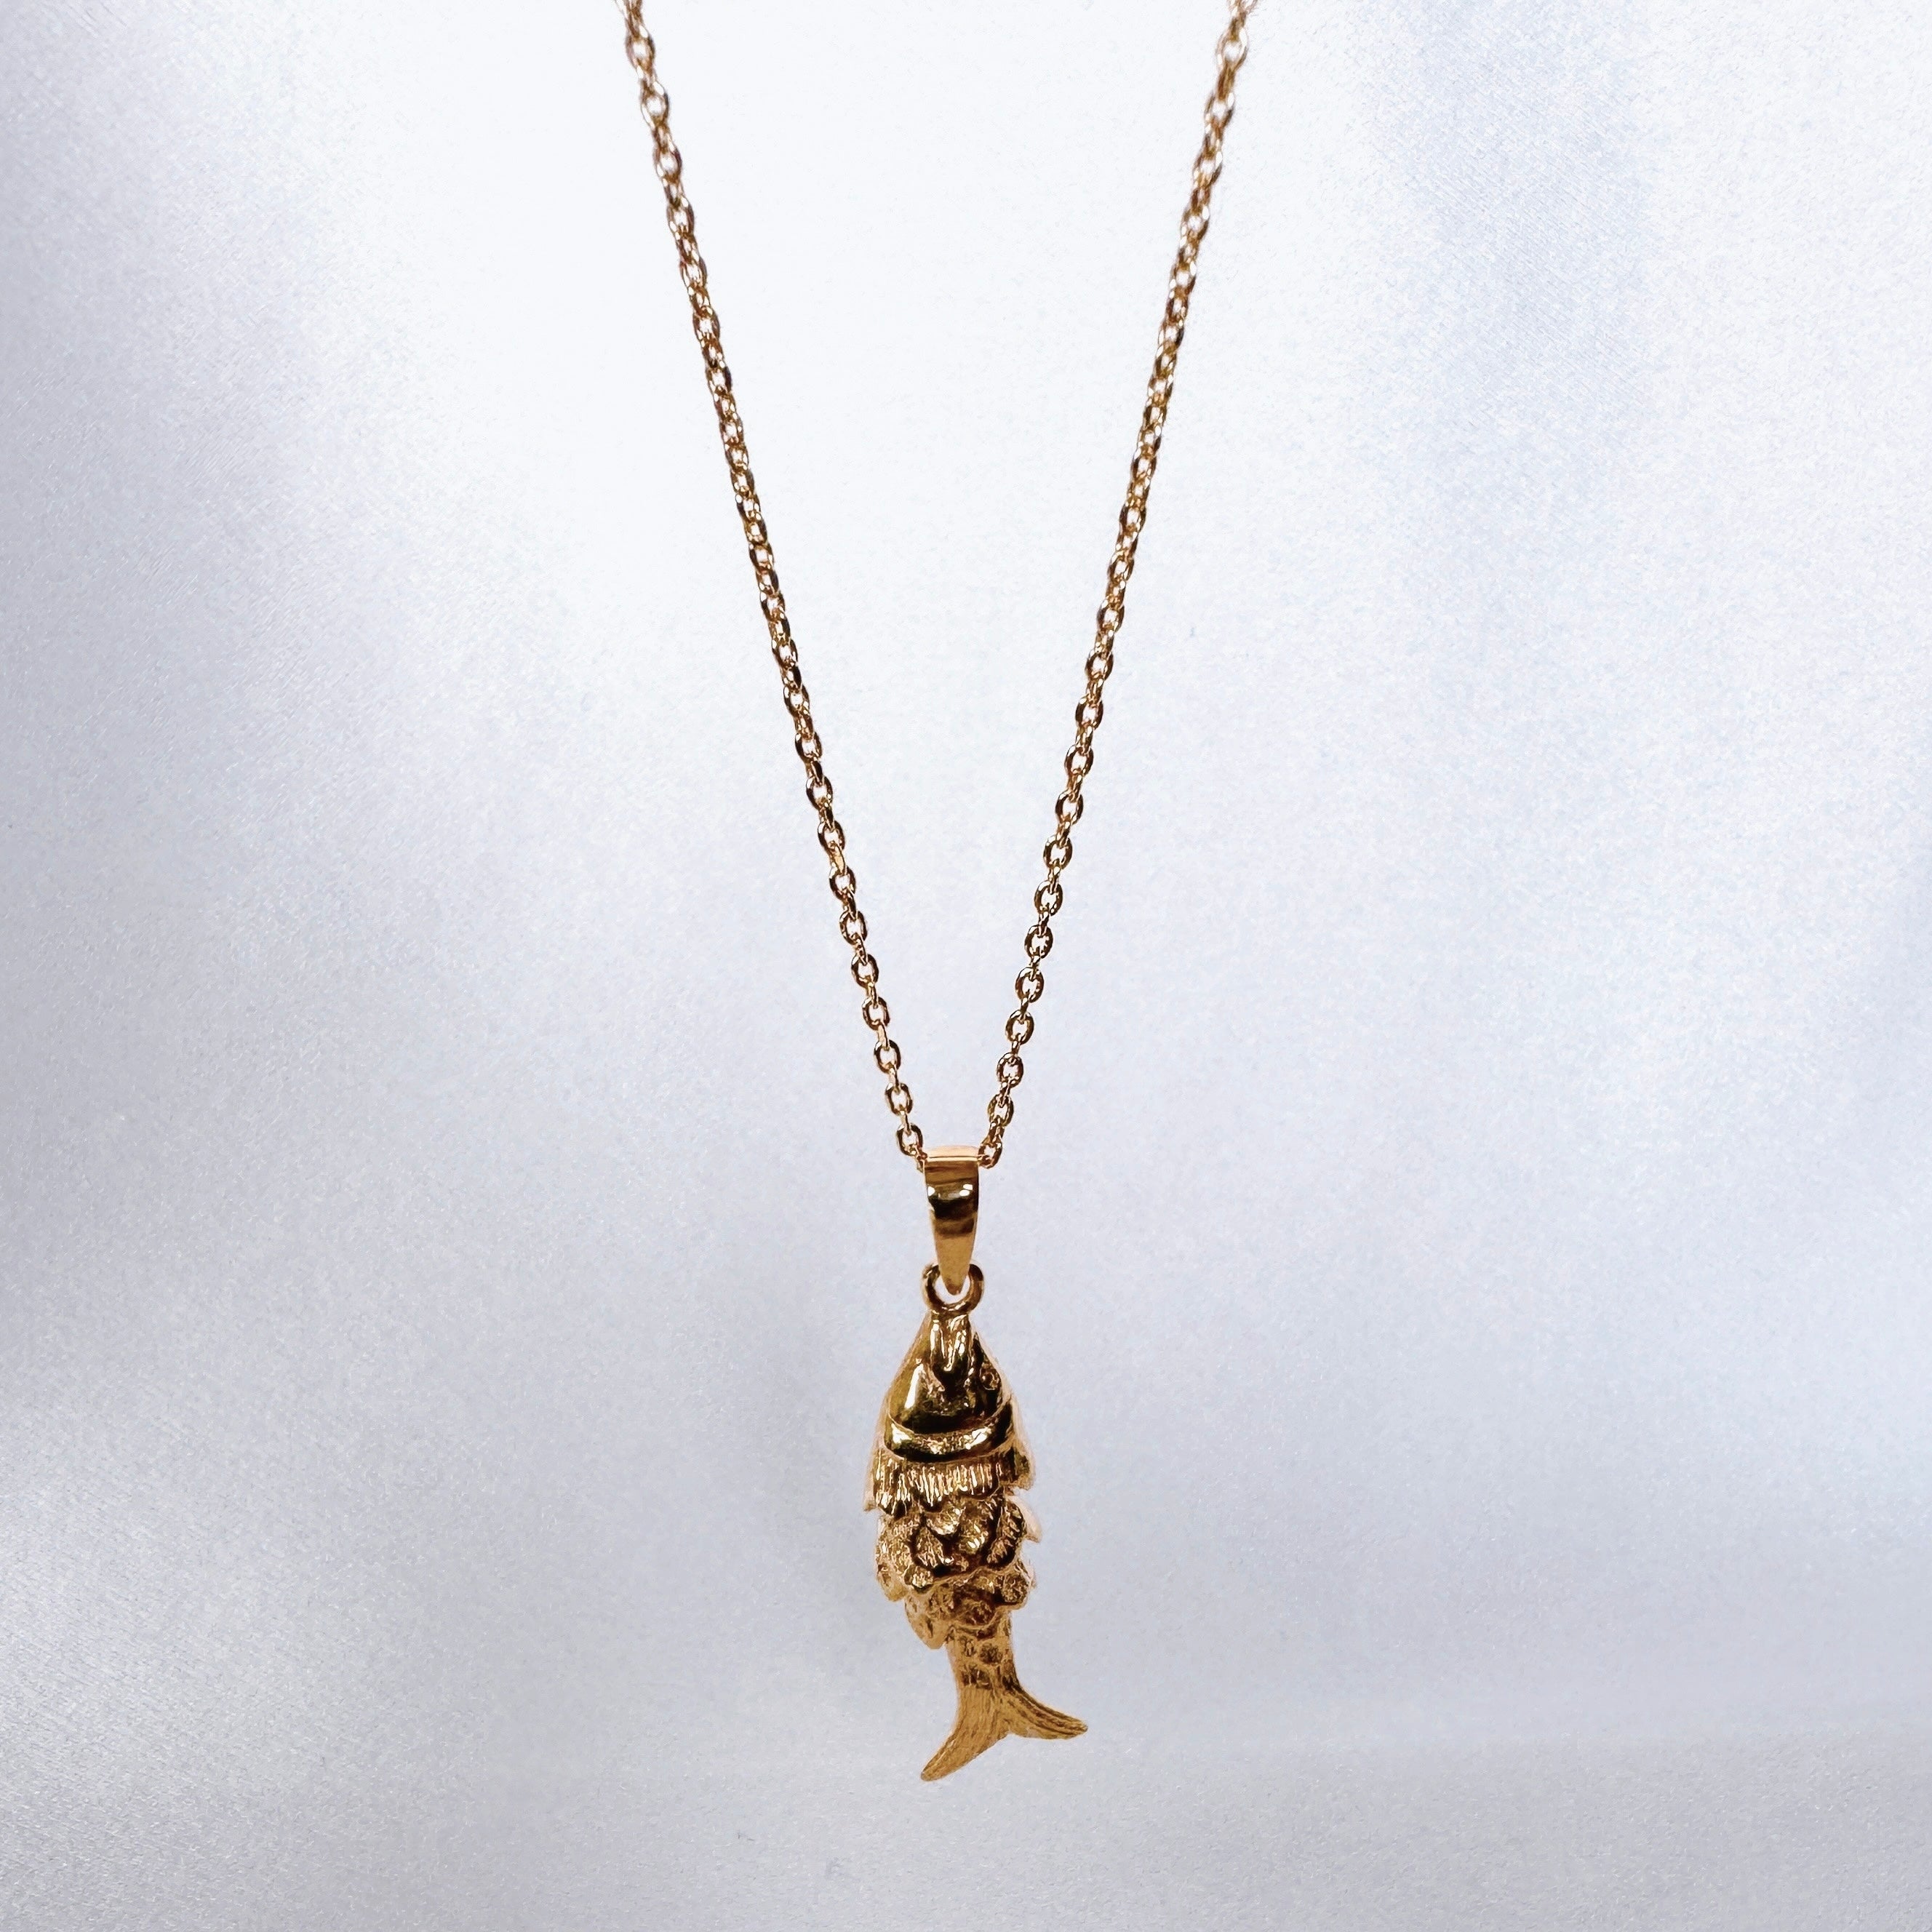 Gold-plated “Little articulated fish” necklace